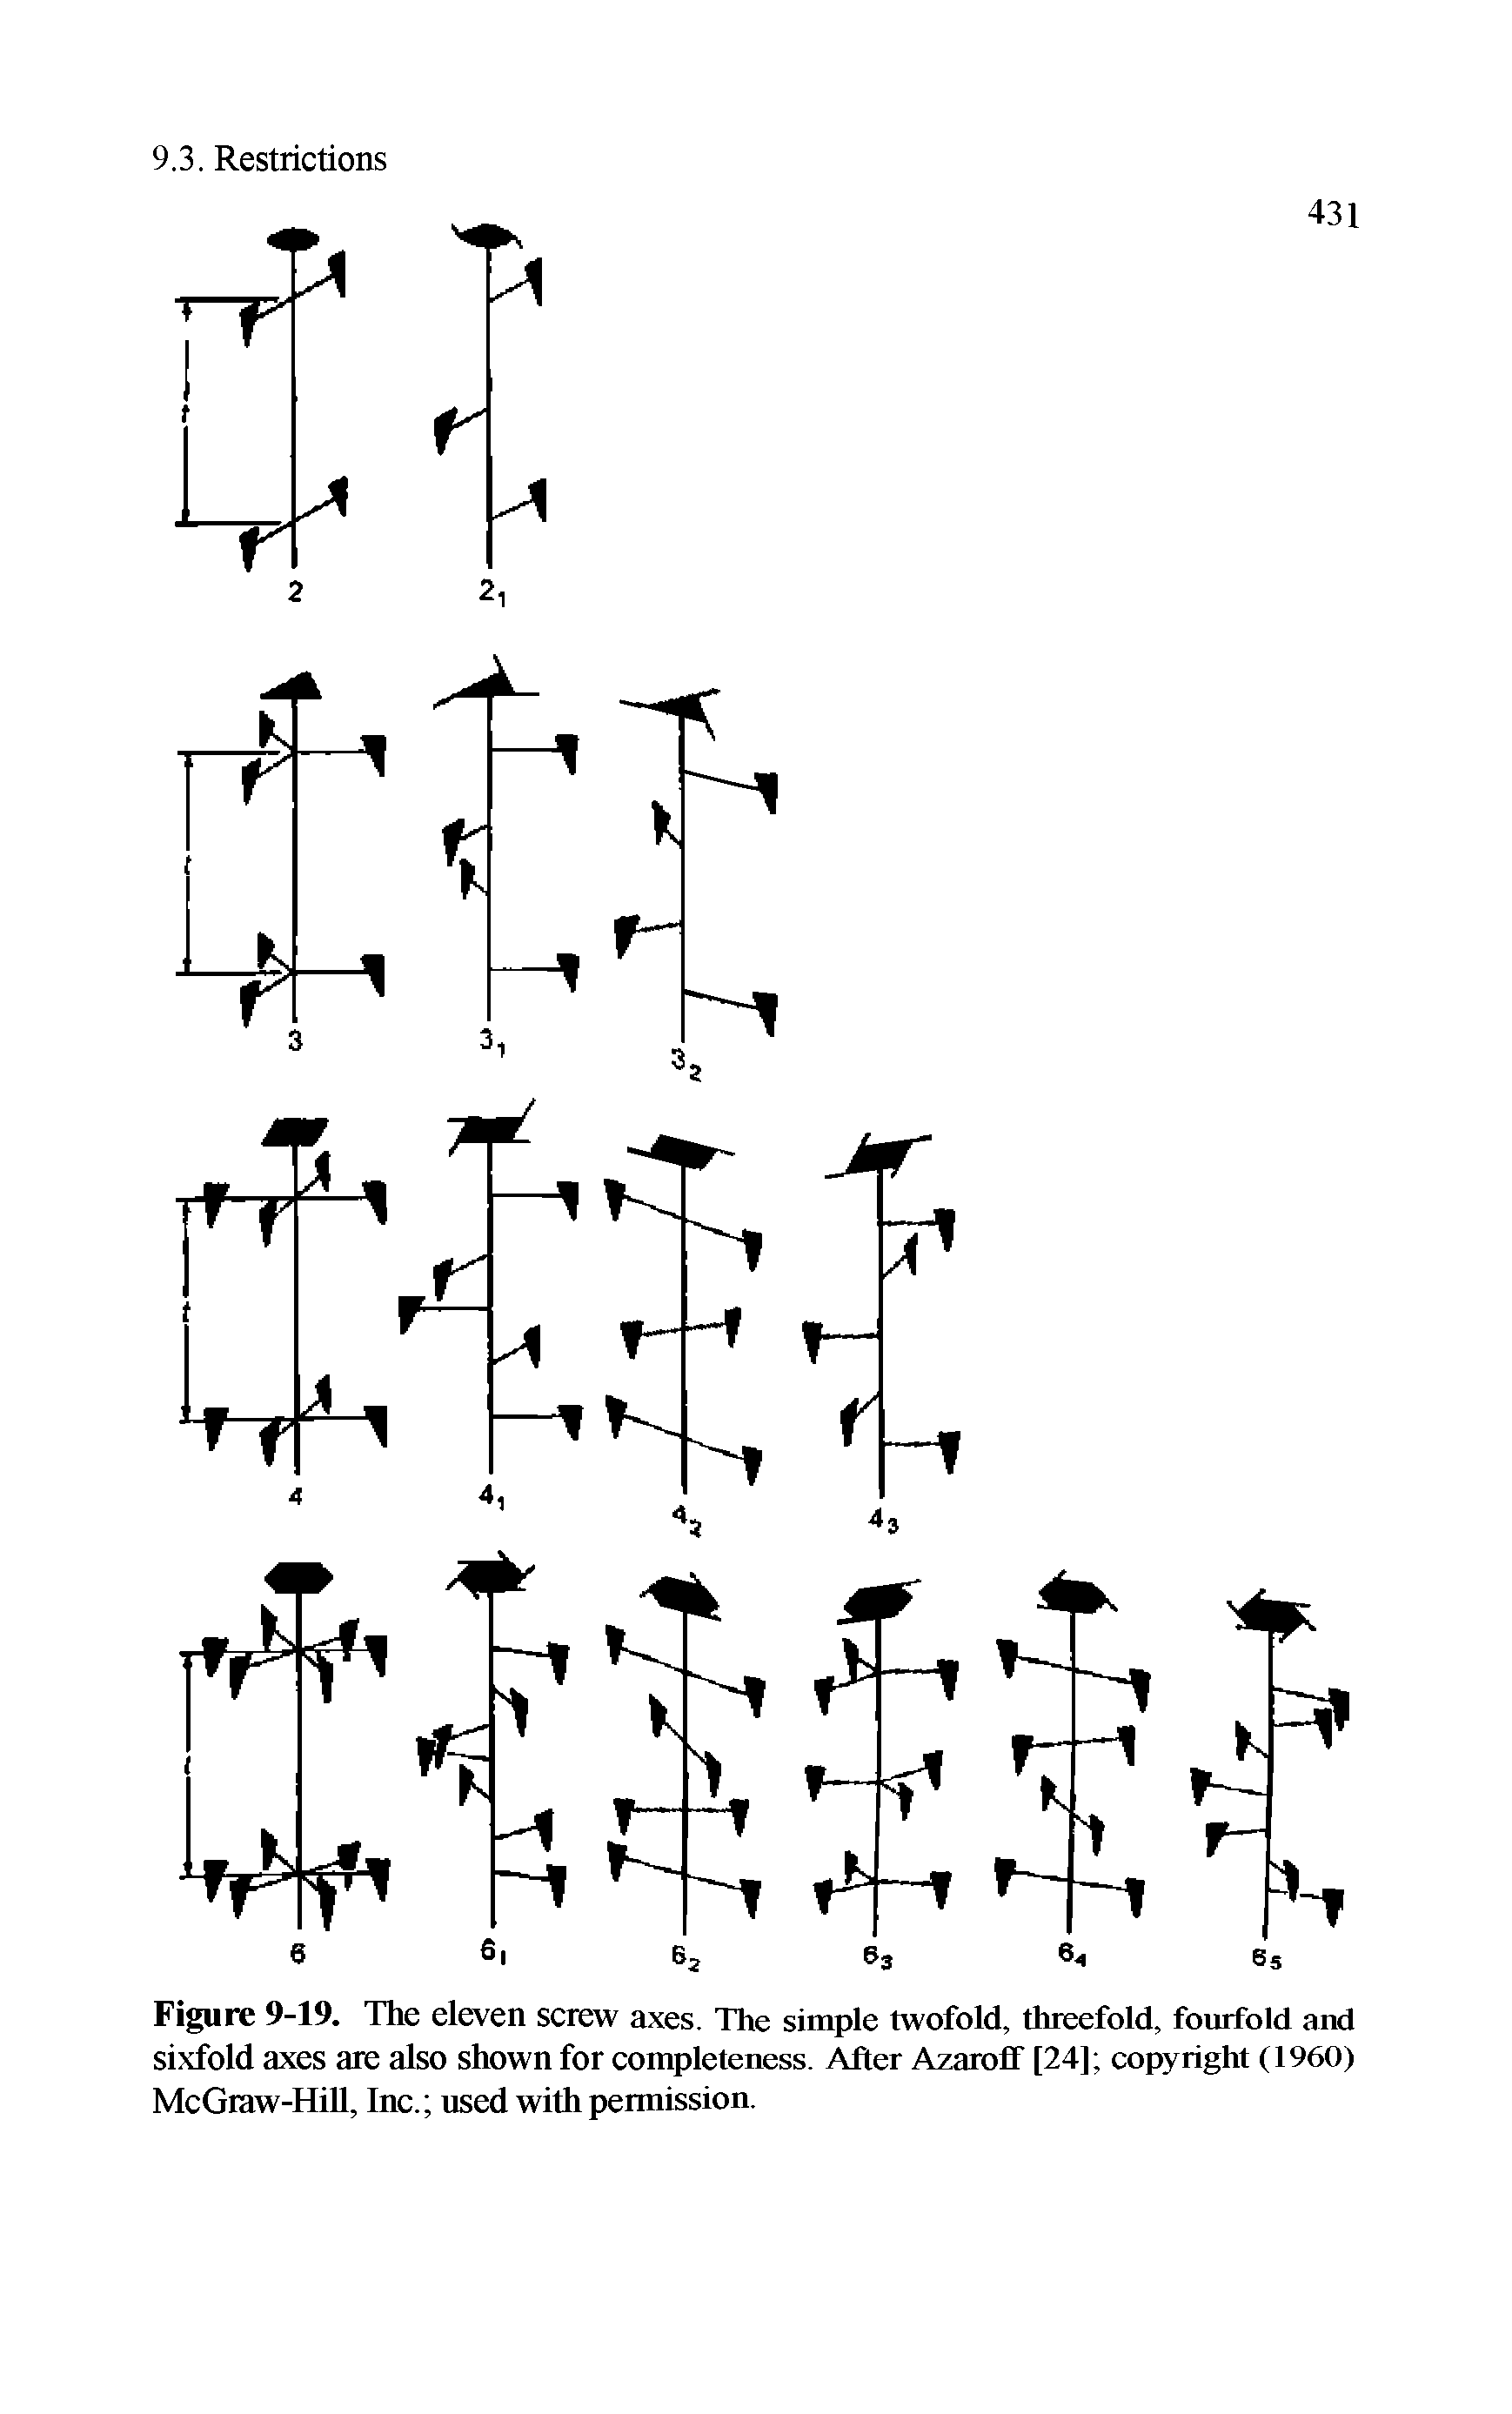 Figure 9-19. The eleven screw axes. The simple twofold, threefold, fourfold and sixfold axes are also shown for completeness. After Azaroff [24] copyright (1960) McGraw-Hill, Inc. used with permission.